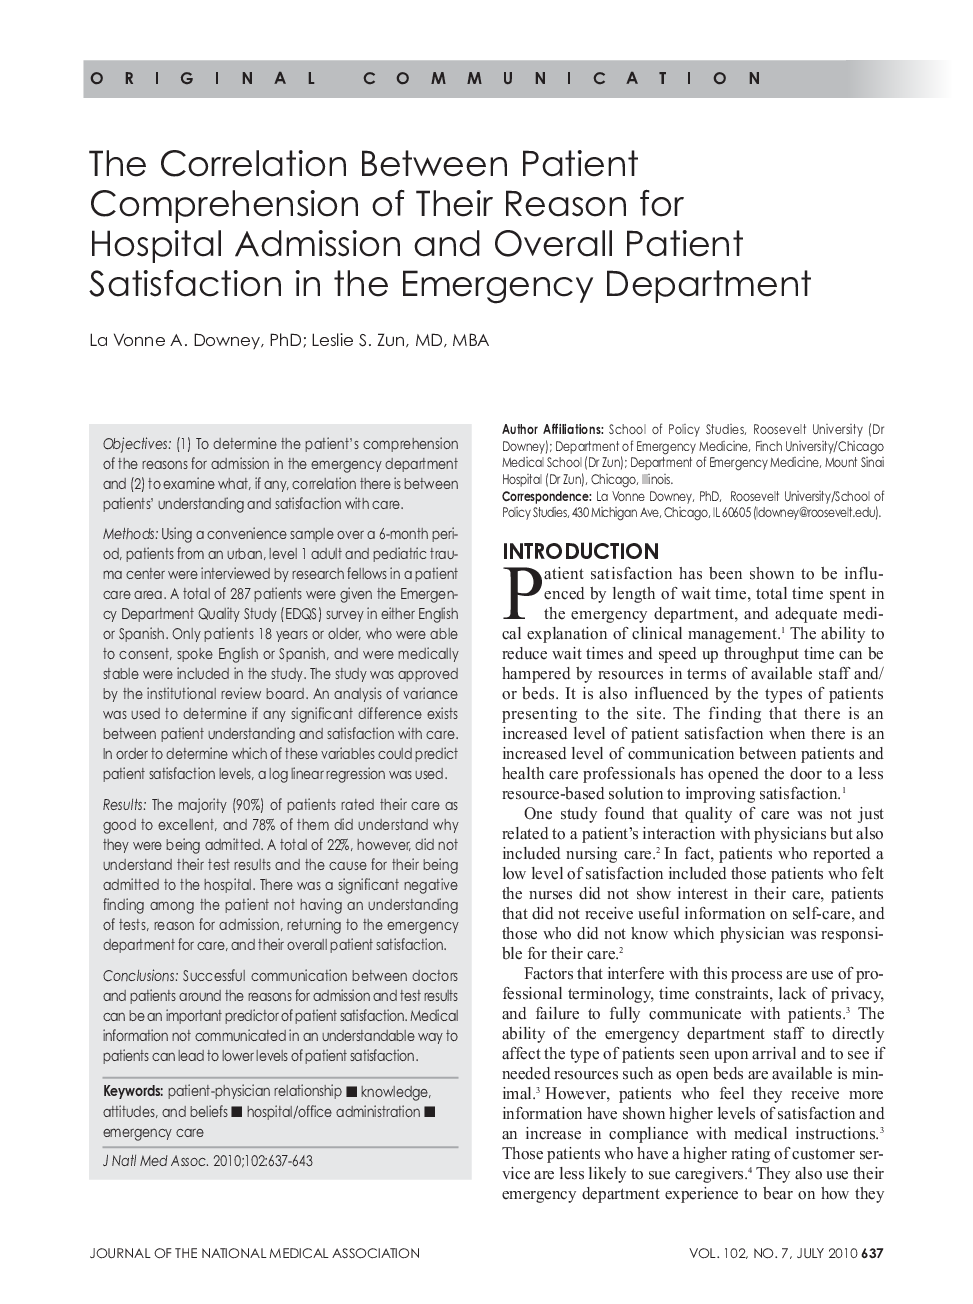 The Correlation Between Patient Comprehension of Their Reason for Hospital Admission and Overall Patient Satisfaction in the Emergency Department